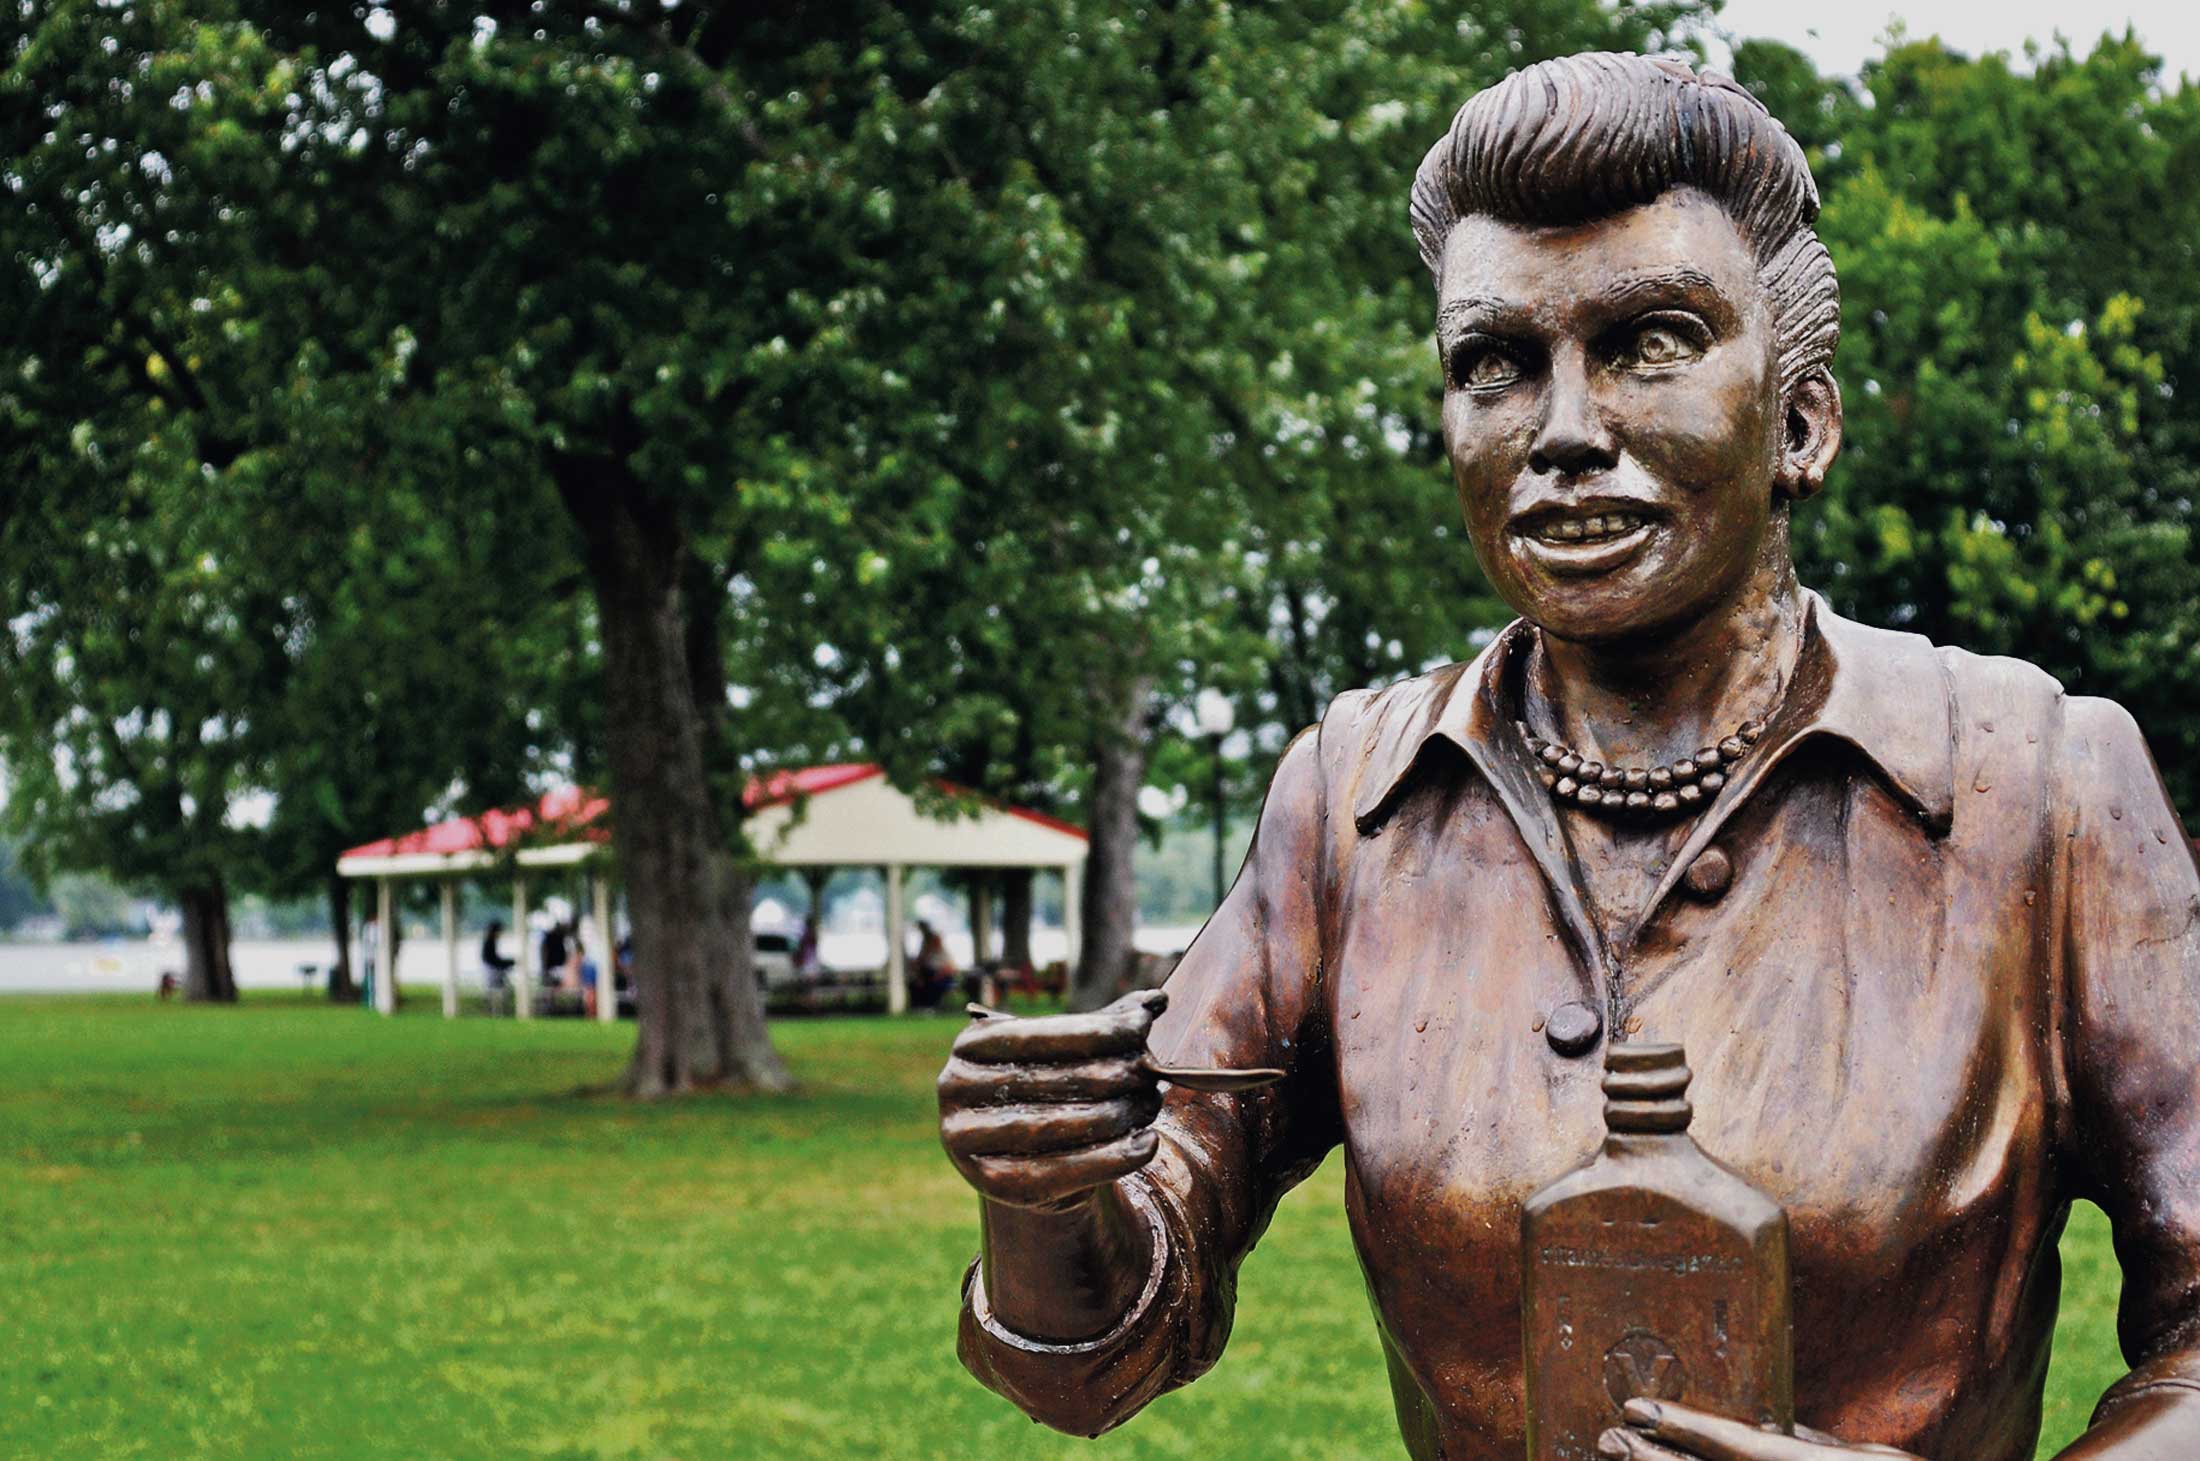 A bronze sculpture of Lucille Ball is displayed in Lucille Ball Memorial Park in the village of Celoron, N.Y., in her hometown.